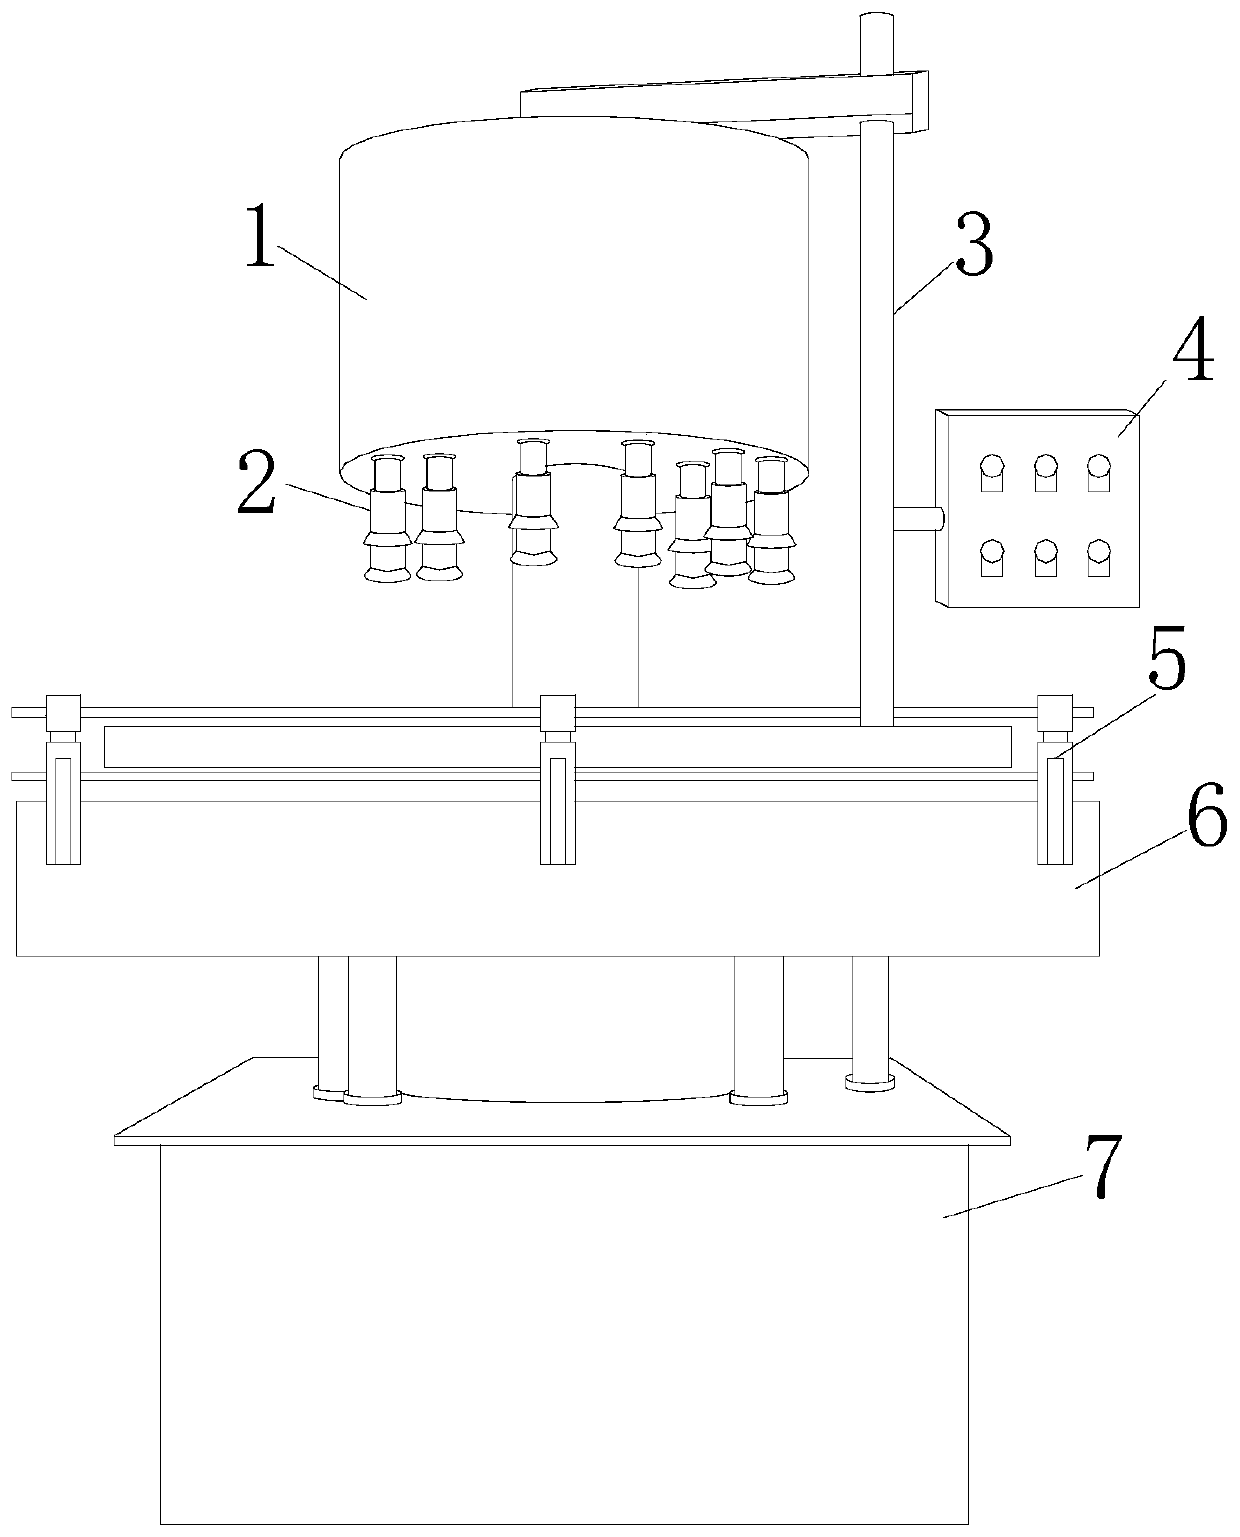 Capping system for glass jar filling